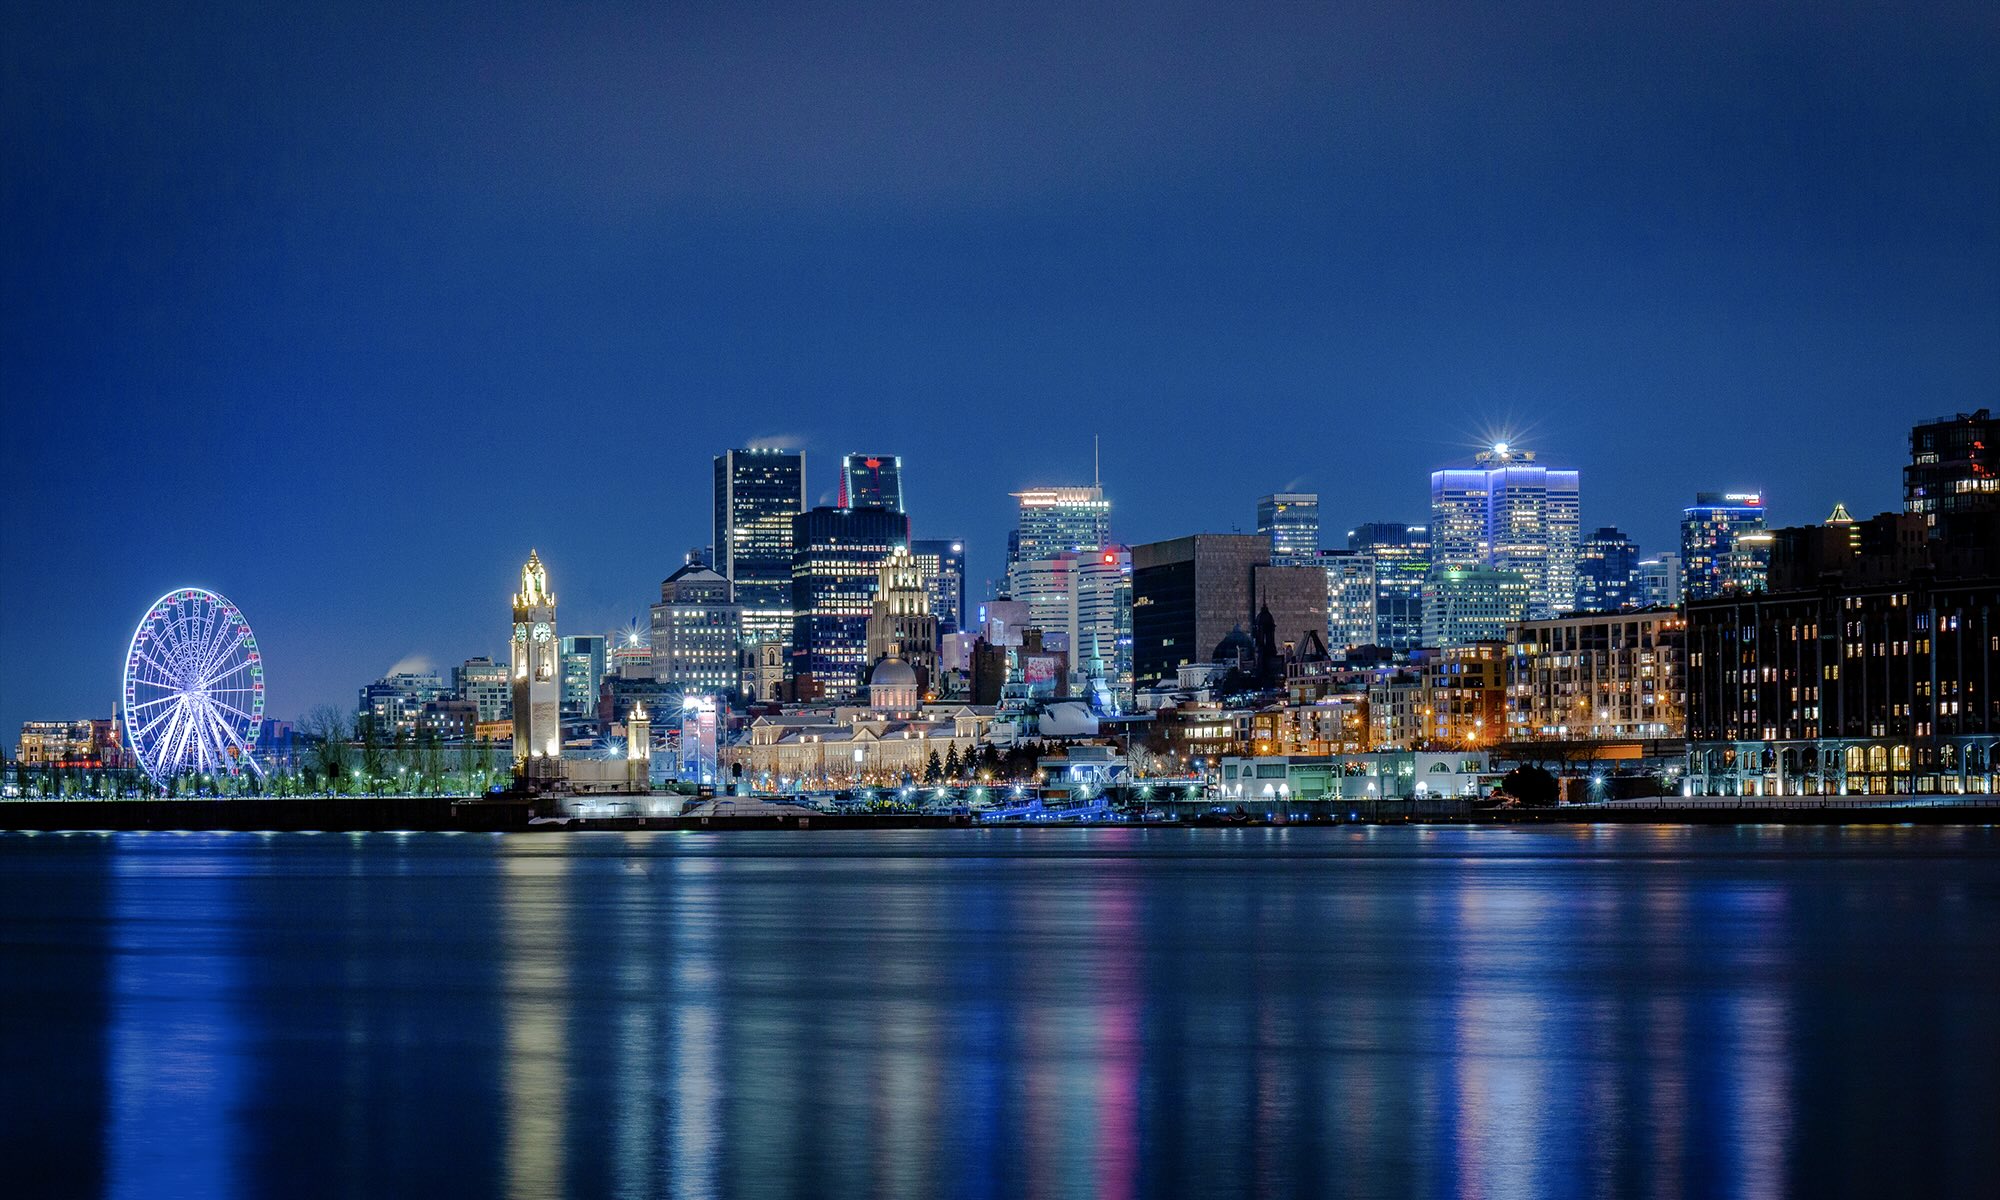 City of Montreal from the water at night with the skyline lit up.